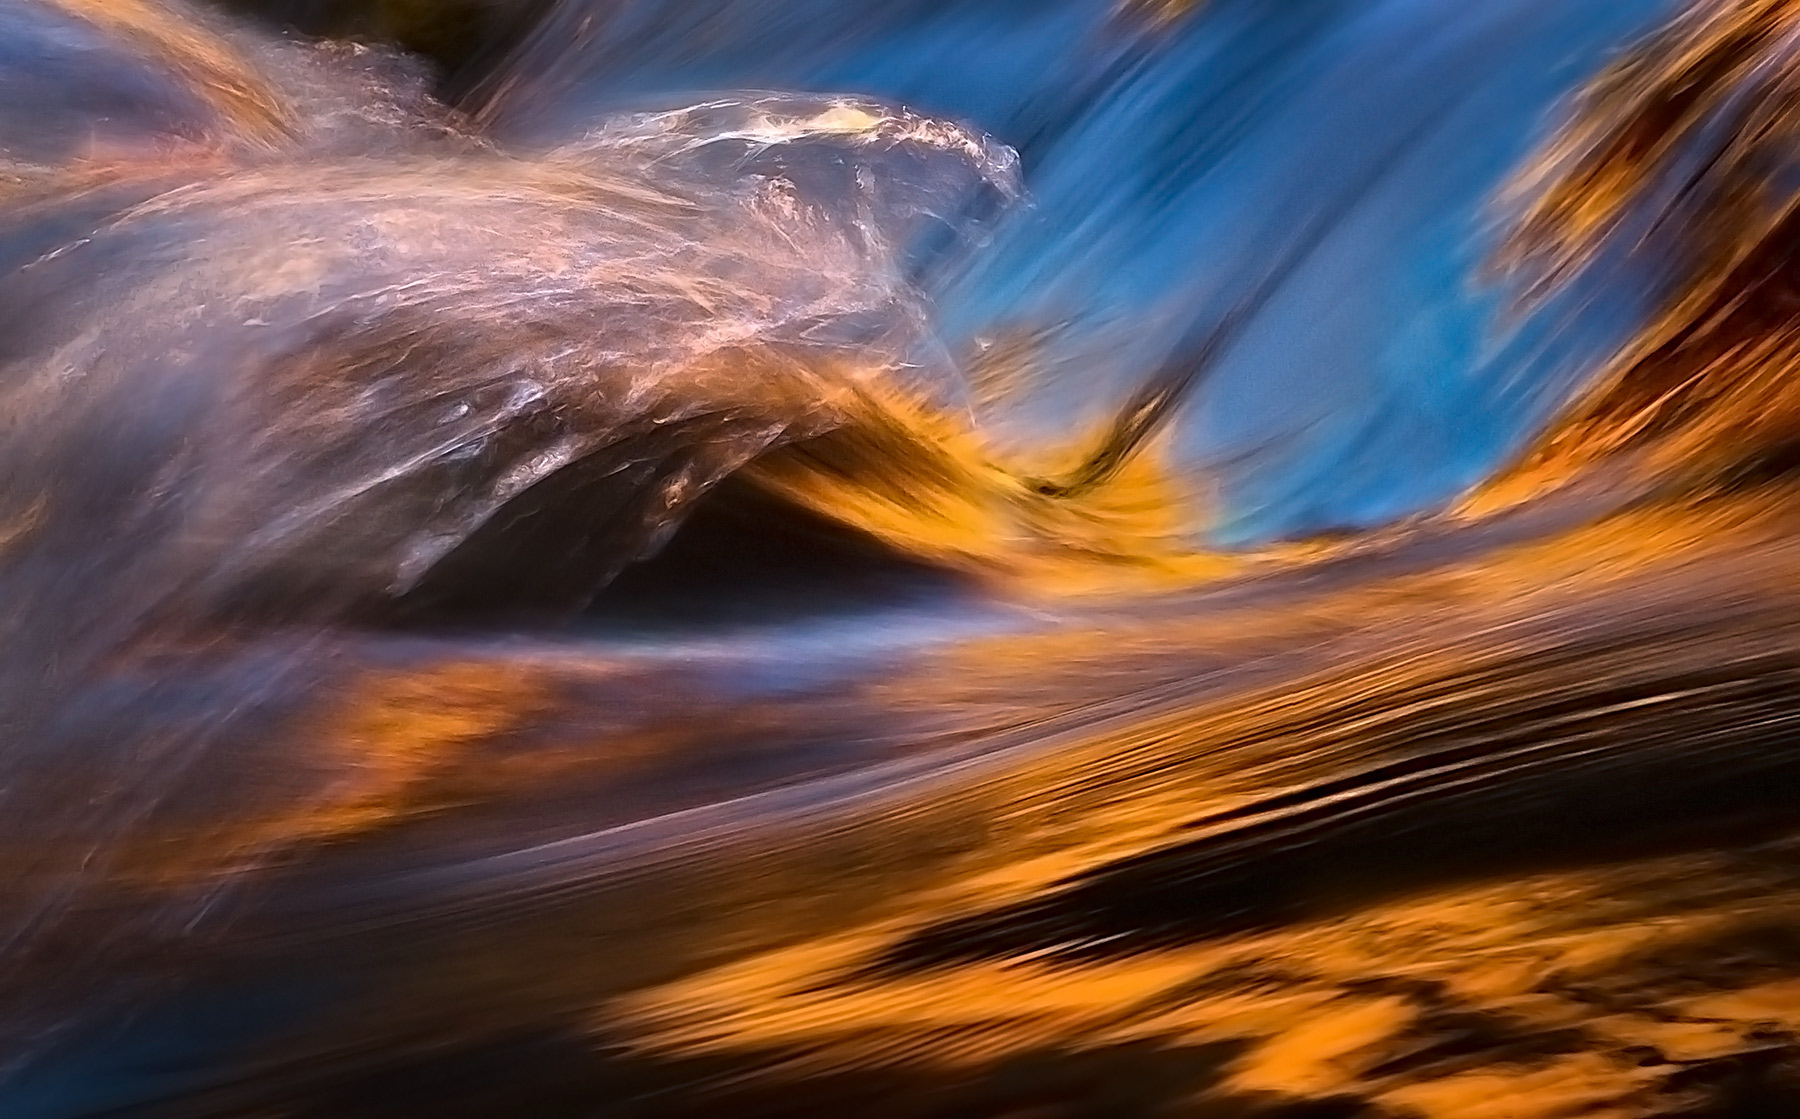 Reflected sandstone gold and blue skies captured by water motion in Zion, Utah.